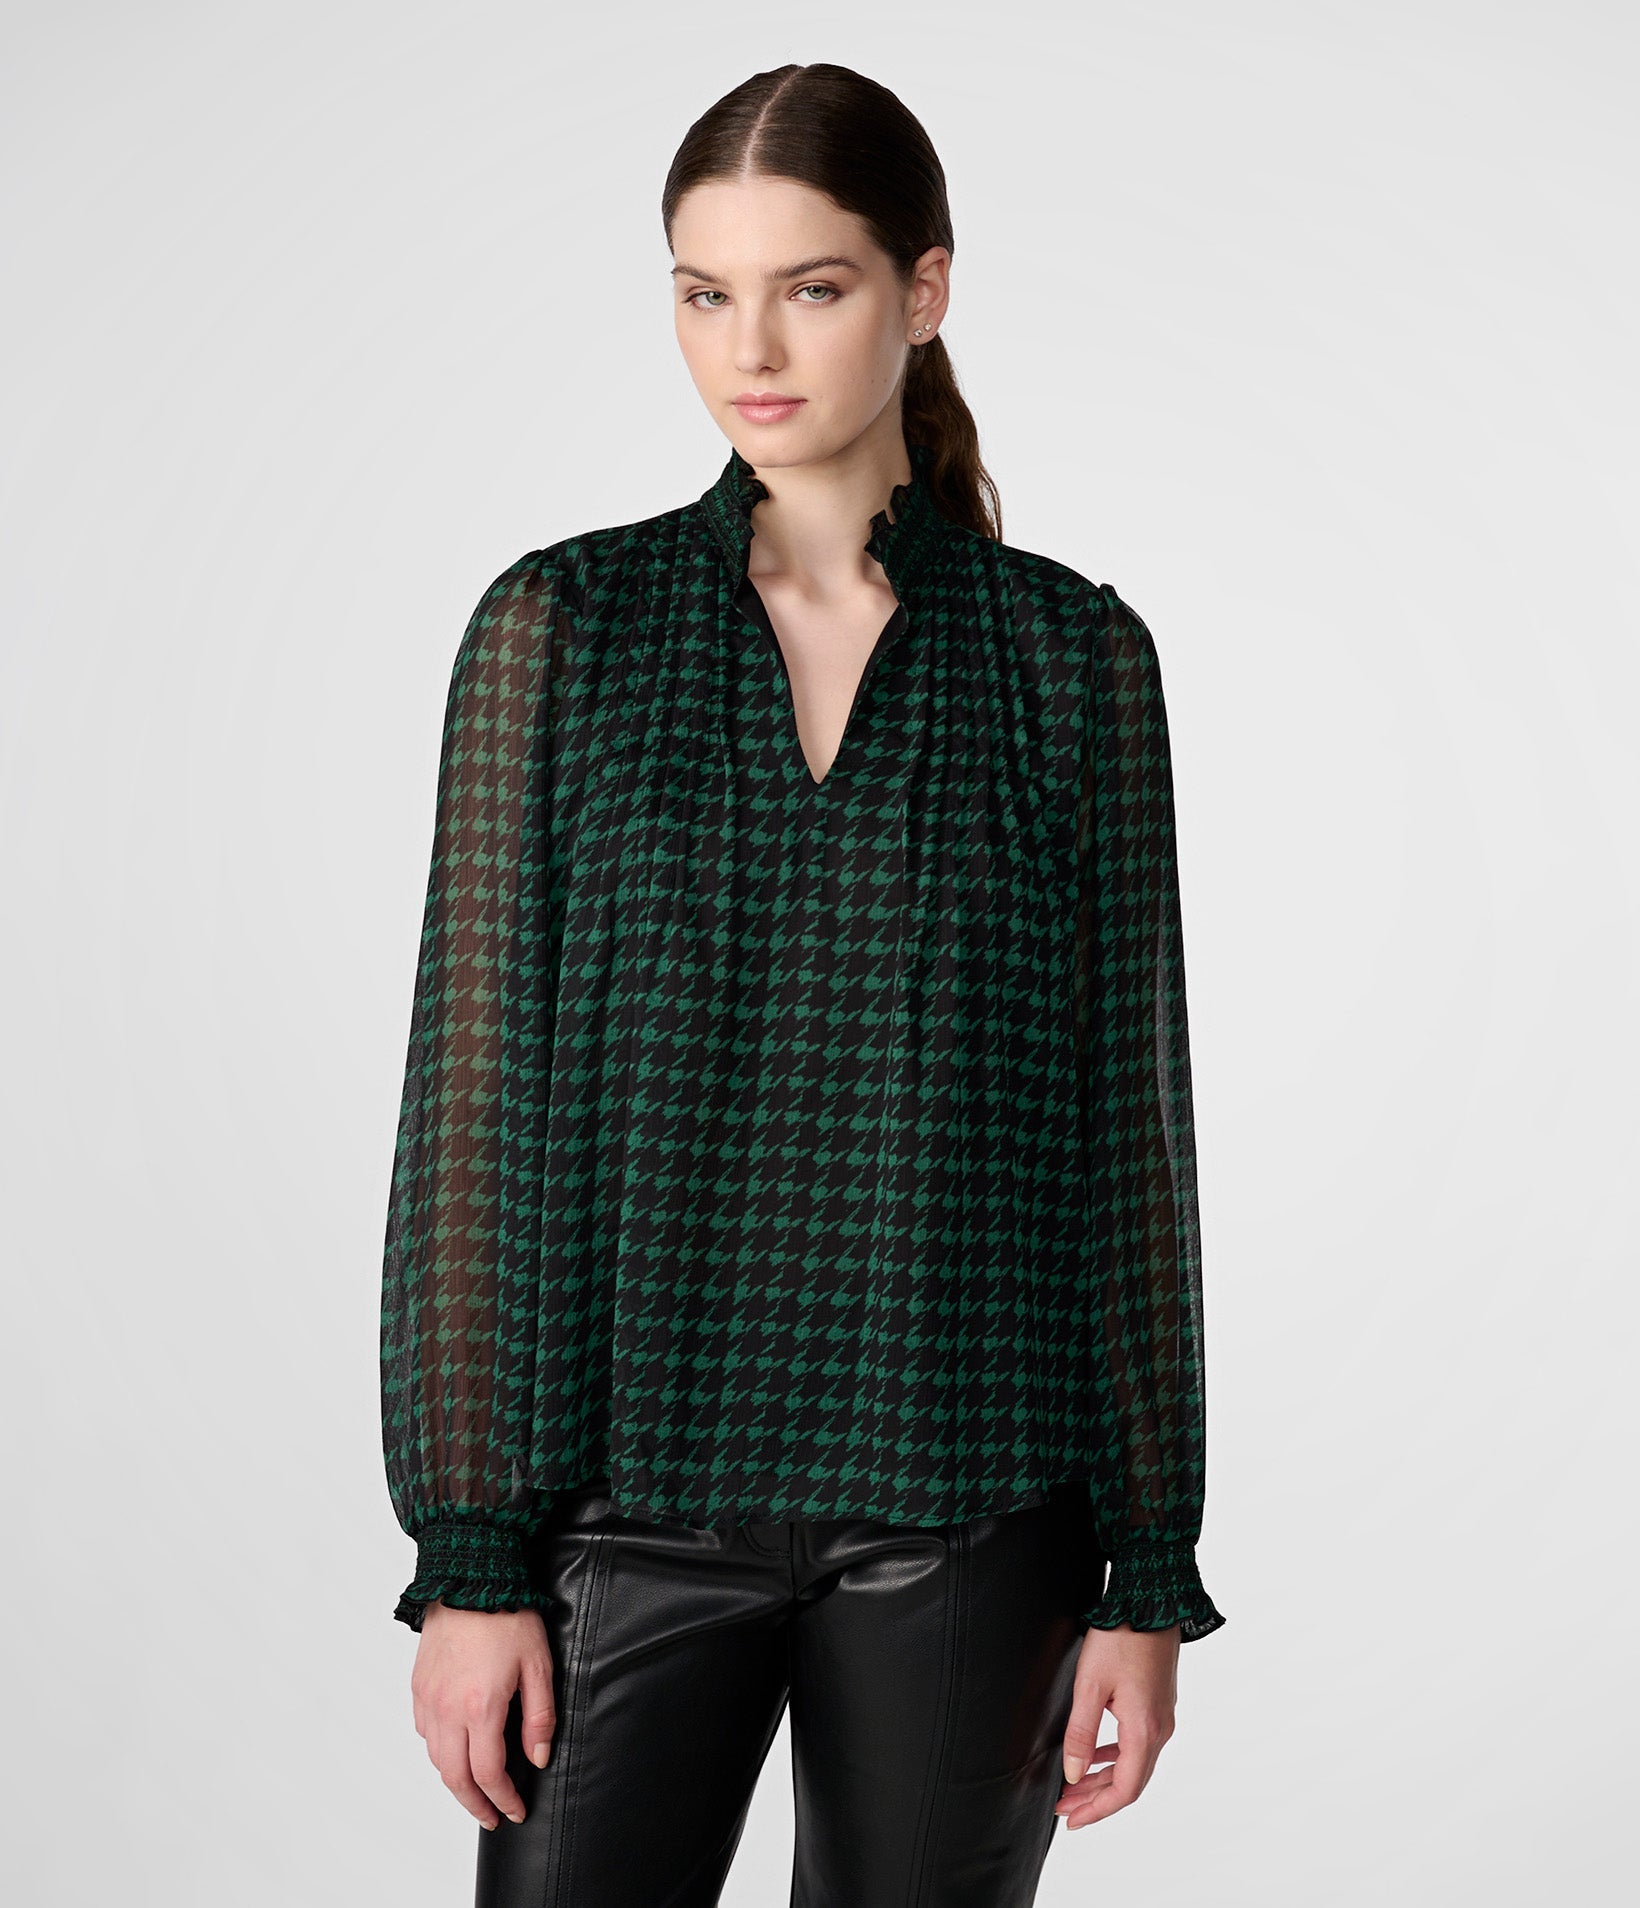 HOUNDSTOOTH SMOCKED DETAIL CHIFFON BLOUSE